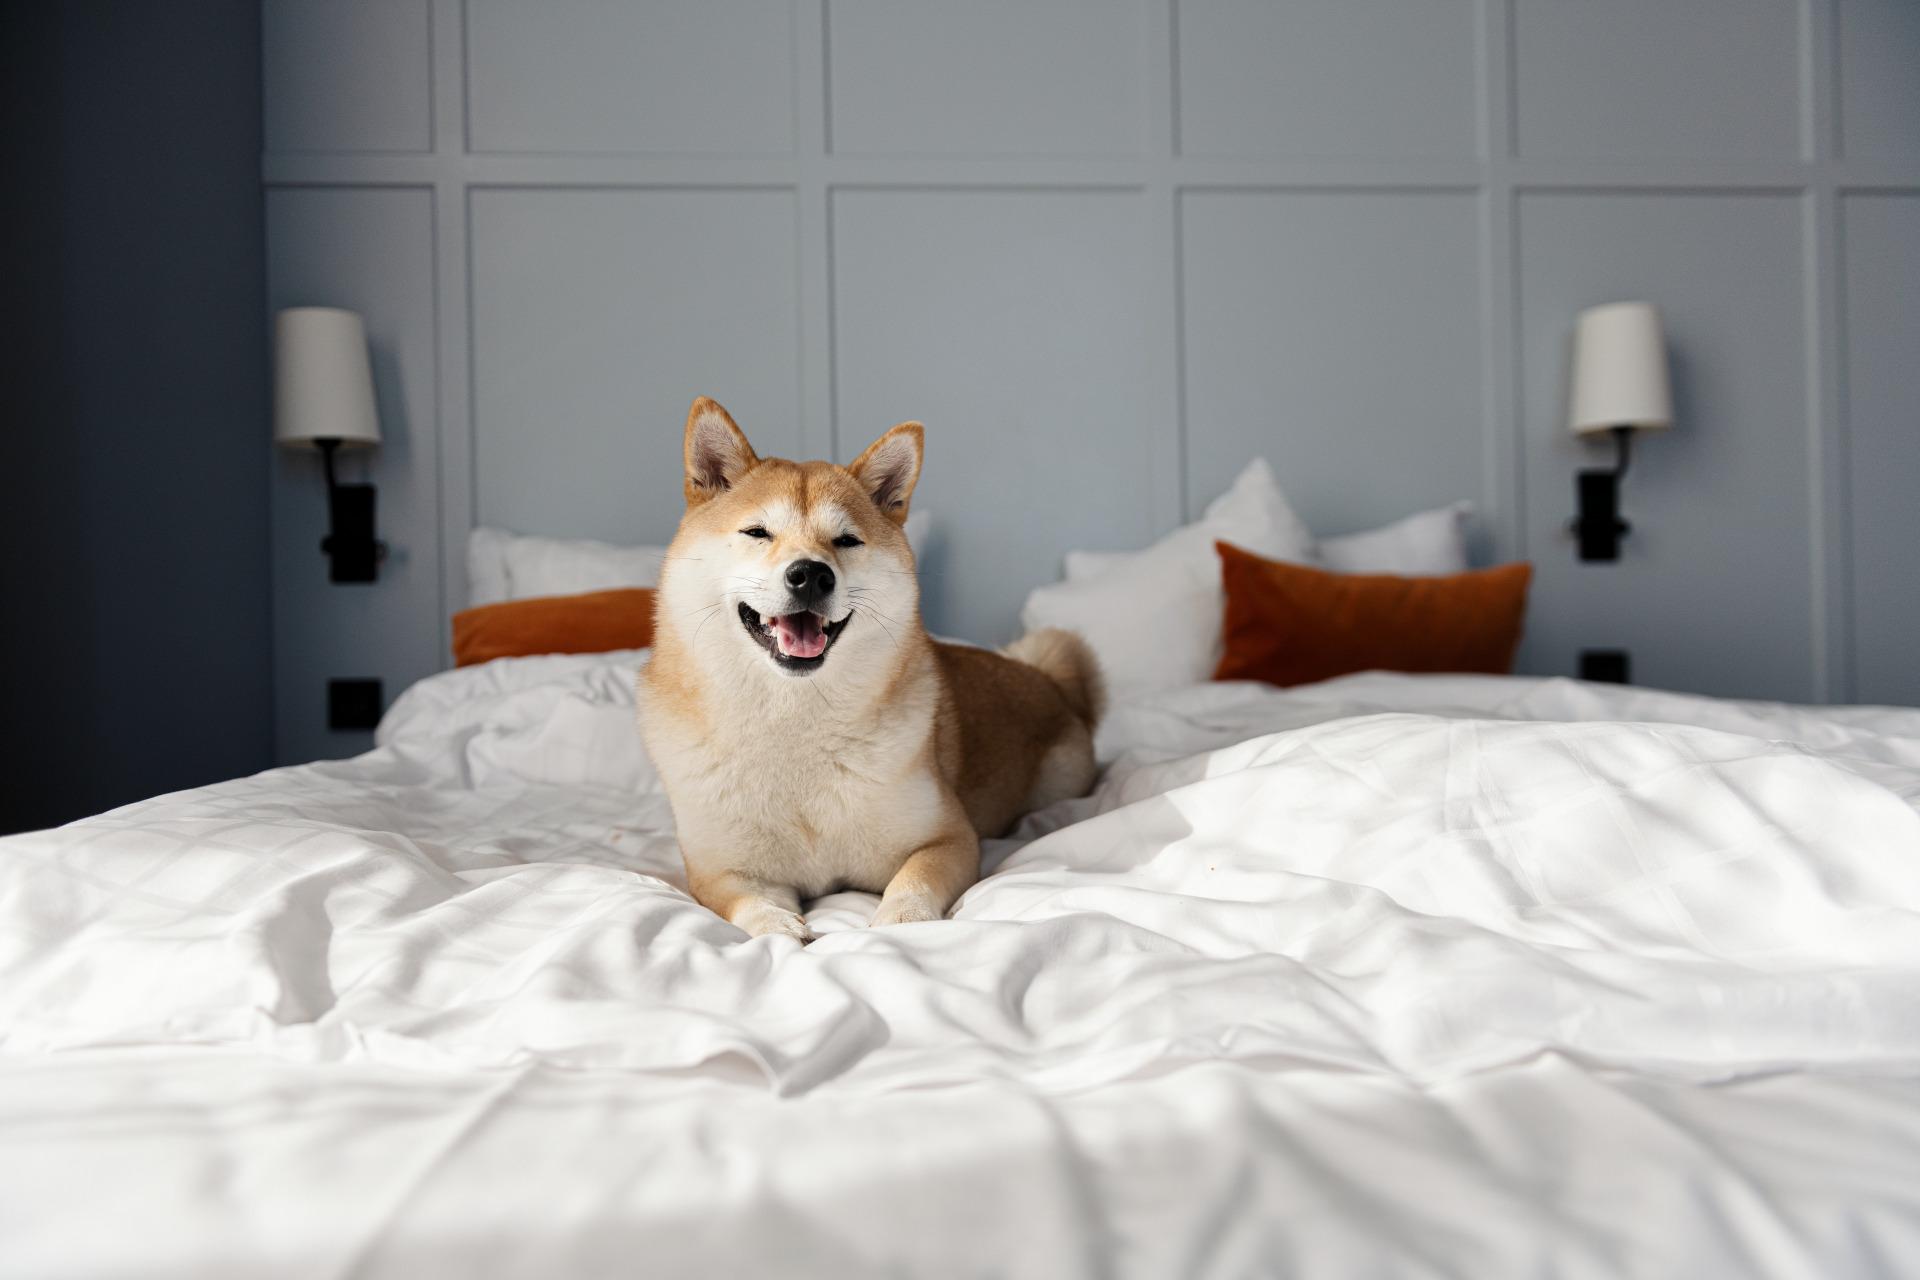 A dog lies on white linen on a hotel bed.